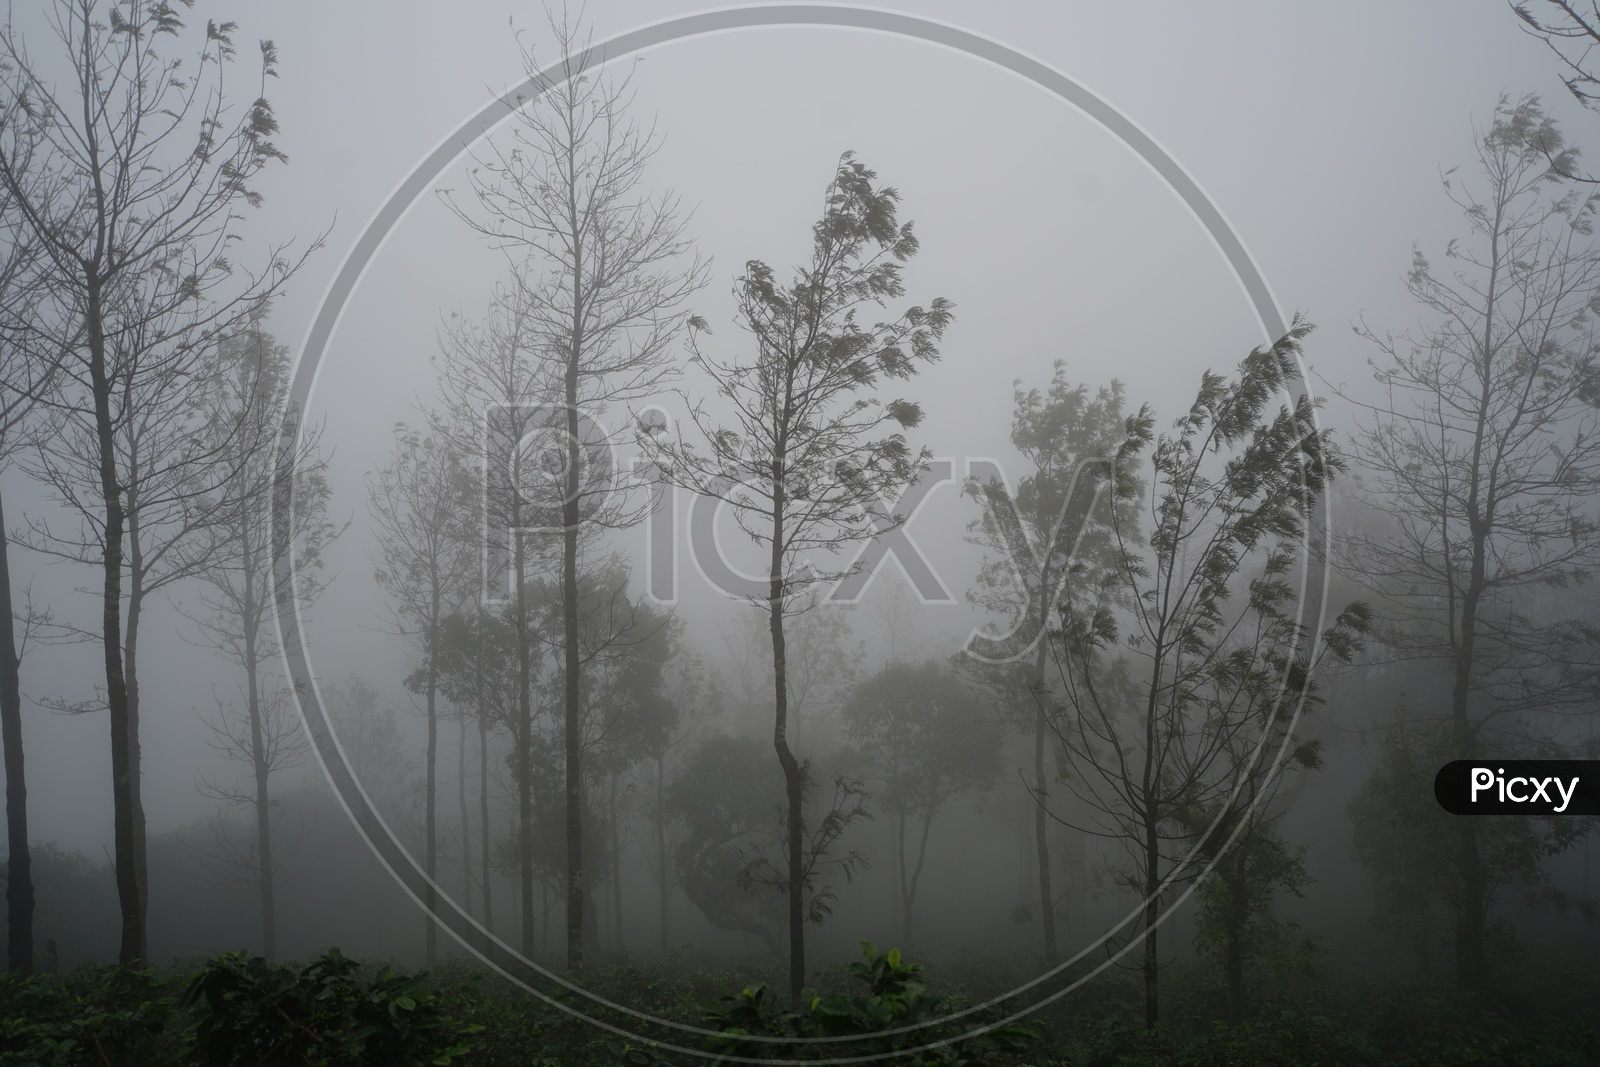 Foggy Mornings in Chickmangalur / Forests in Chickmangalur / Views of Valleys In Chickmangalur